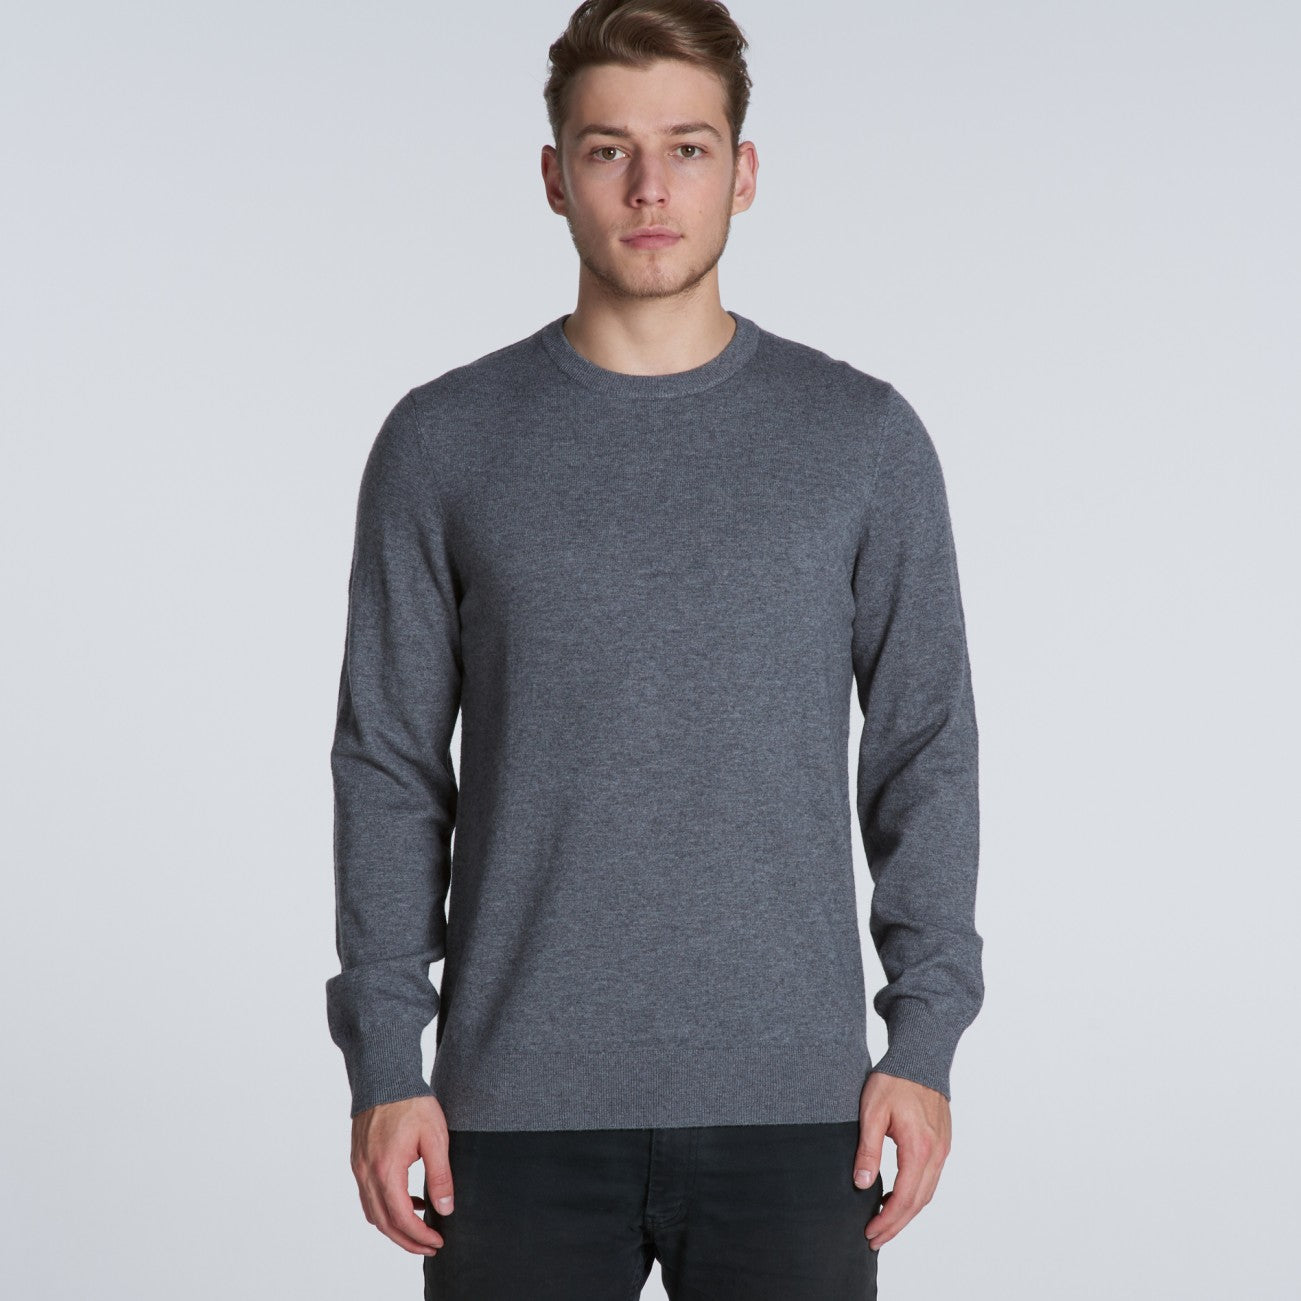 Men's simple knit jumper, embroidered or blank, from $55 each – Luke ...